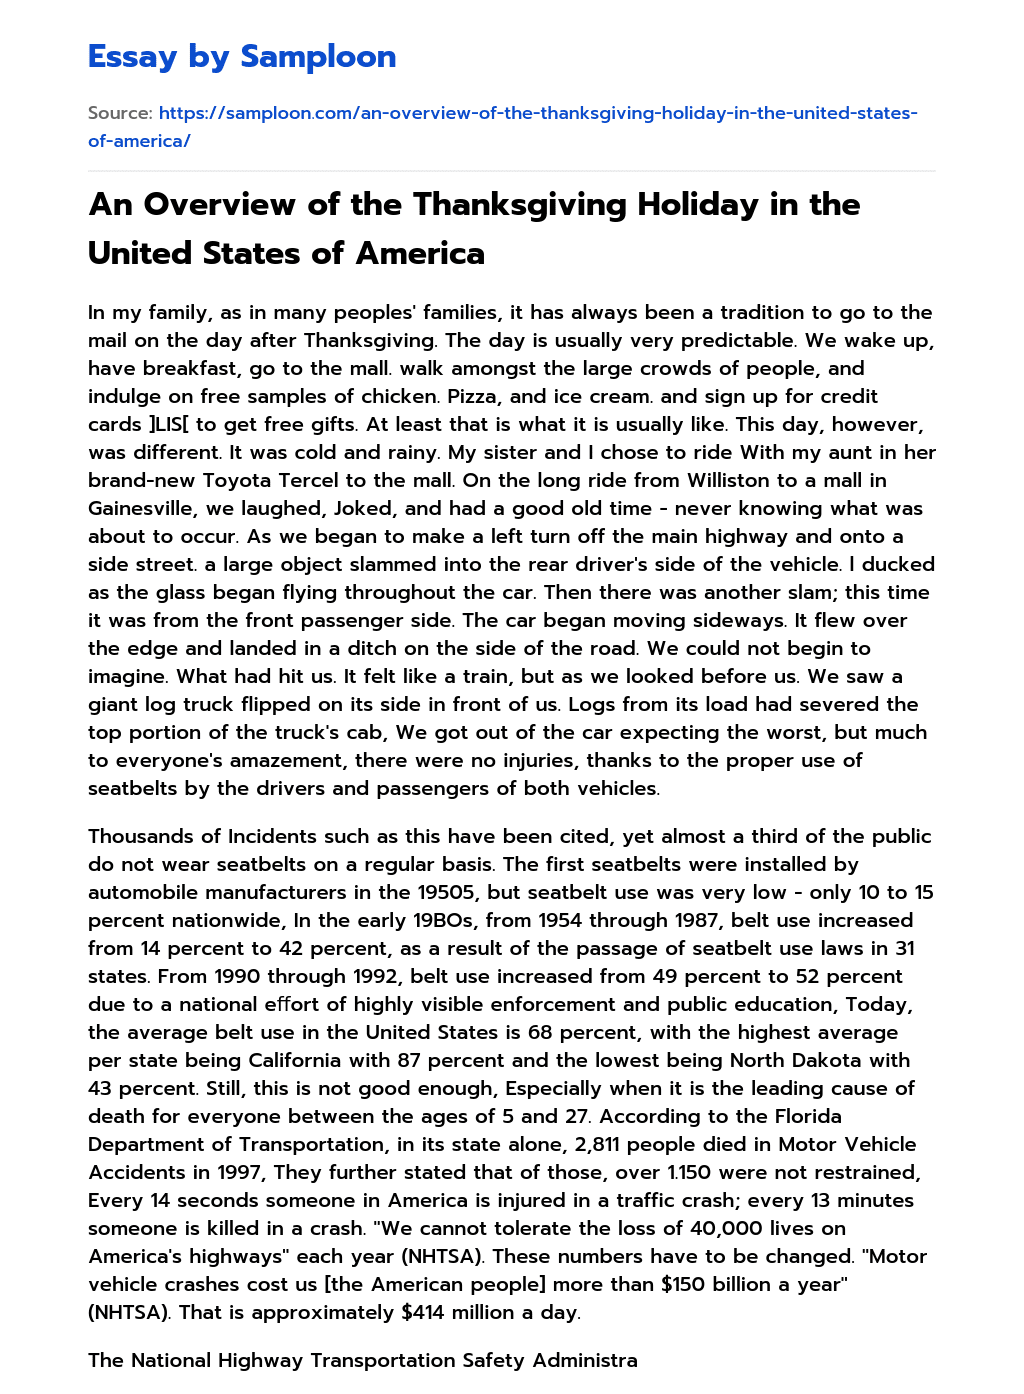 An Overview of the Thanksgiving Holiday in the United States of America essay